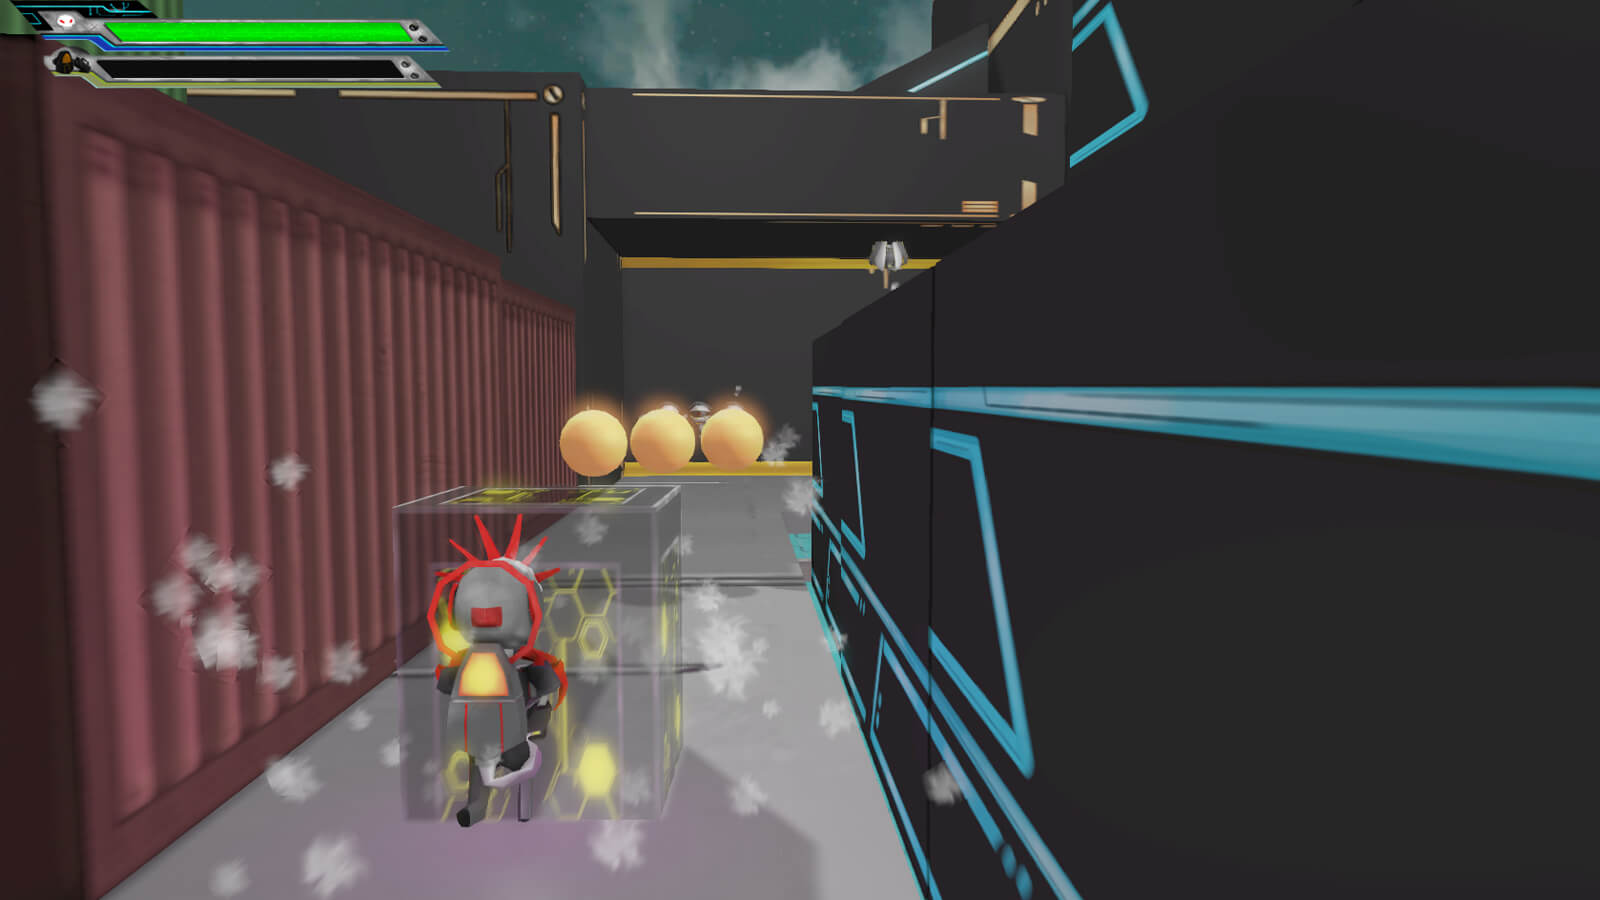 The player's character stands behind a translucent box as three spheres move ahead